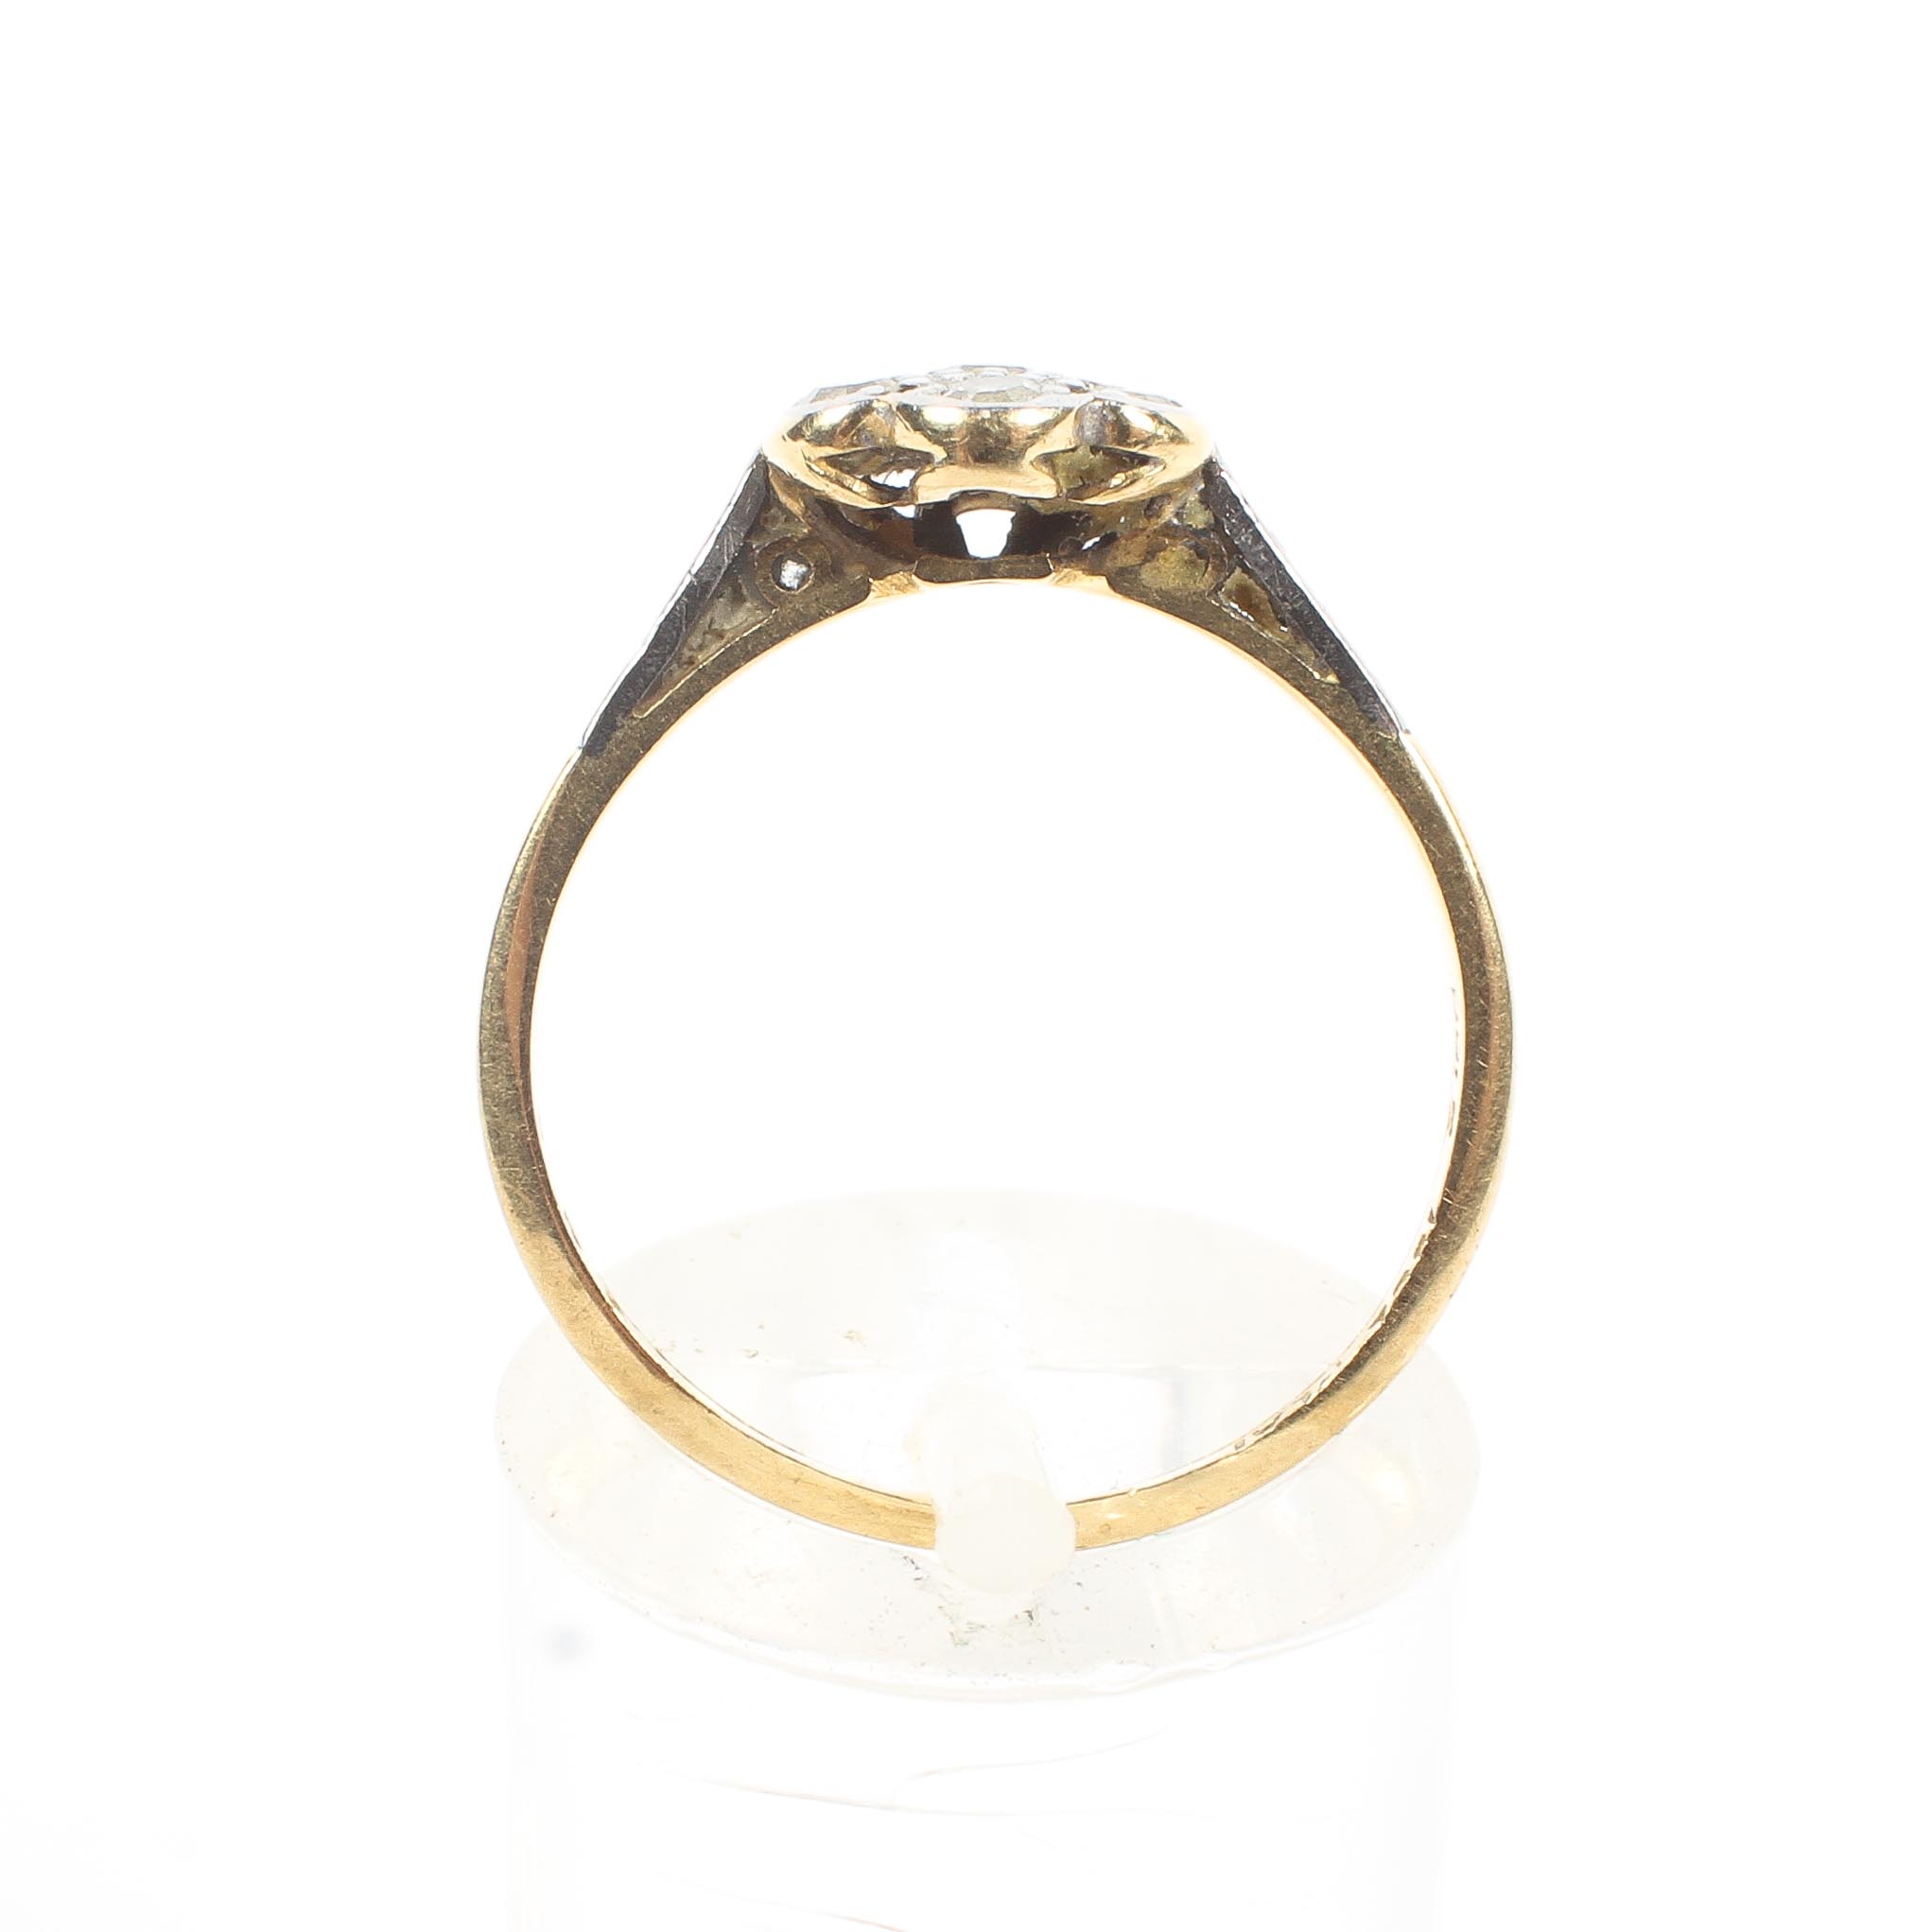 An 18ct gold and platinum flower ring. Set with seven single cut diamonds. 2.1g. Size M. - Image 3 of 4